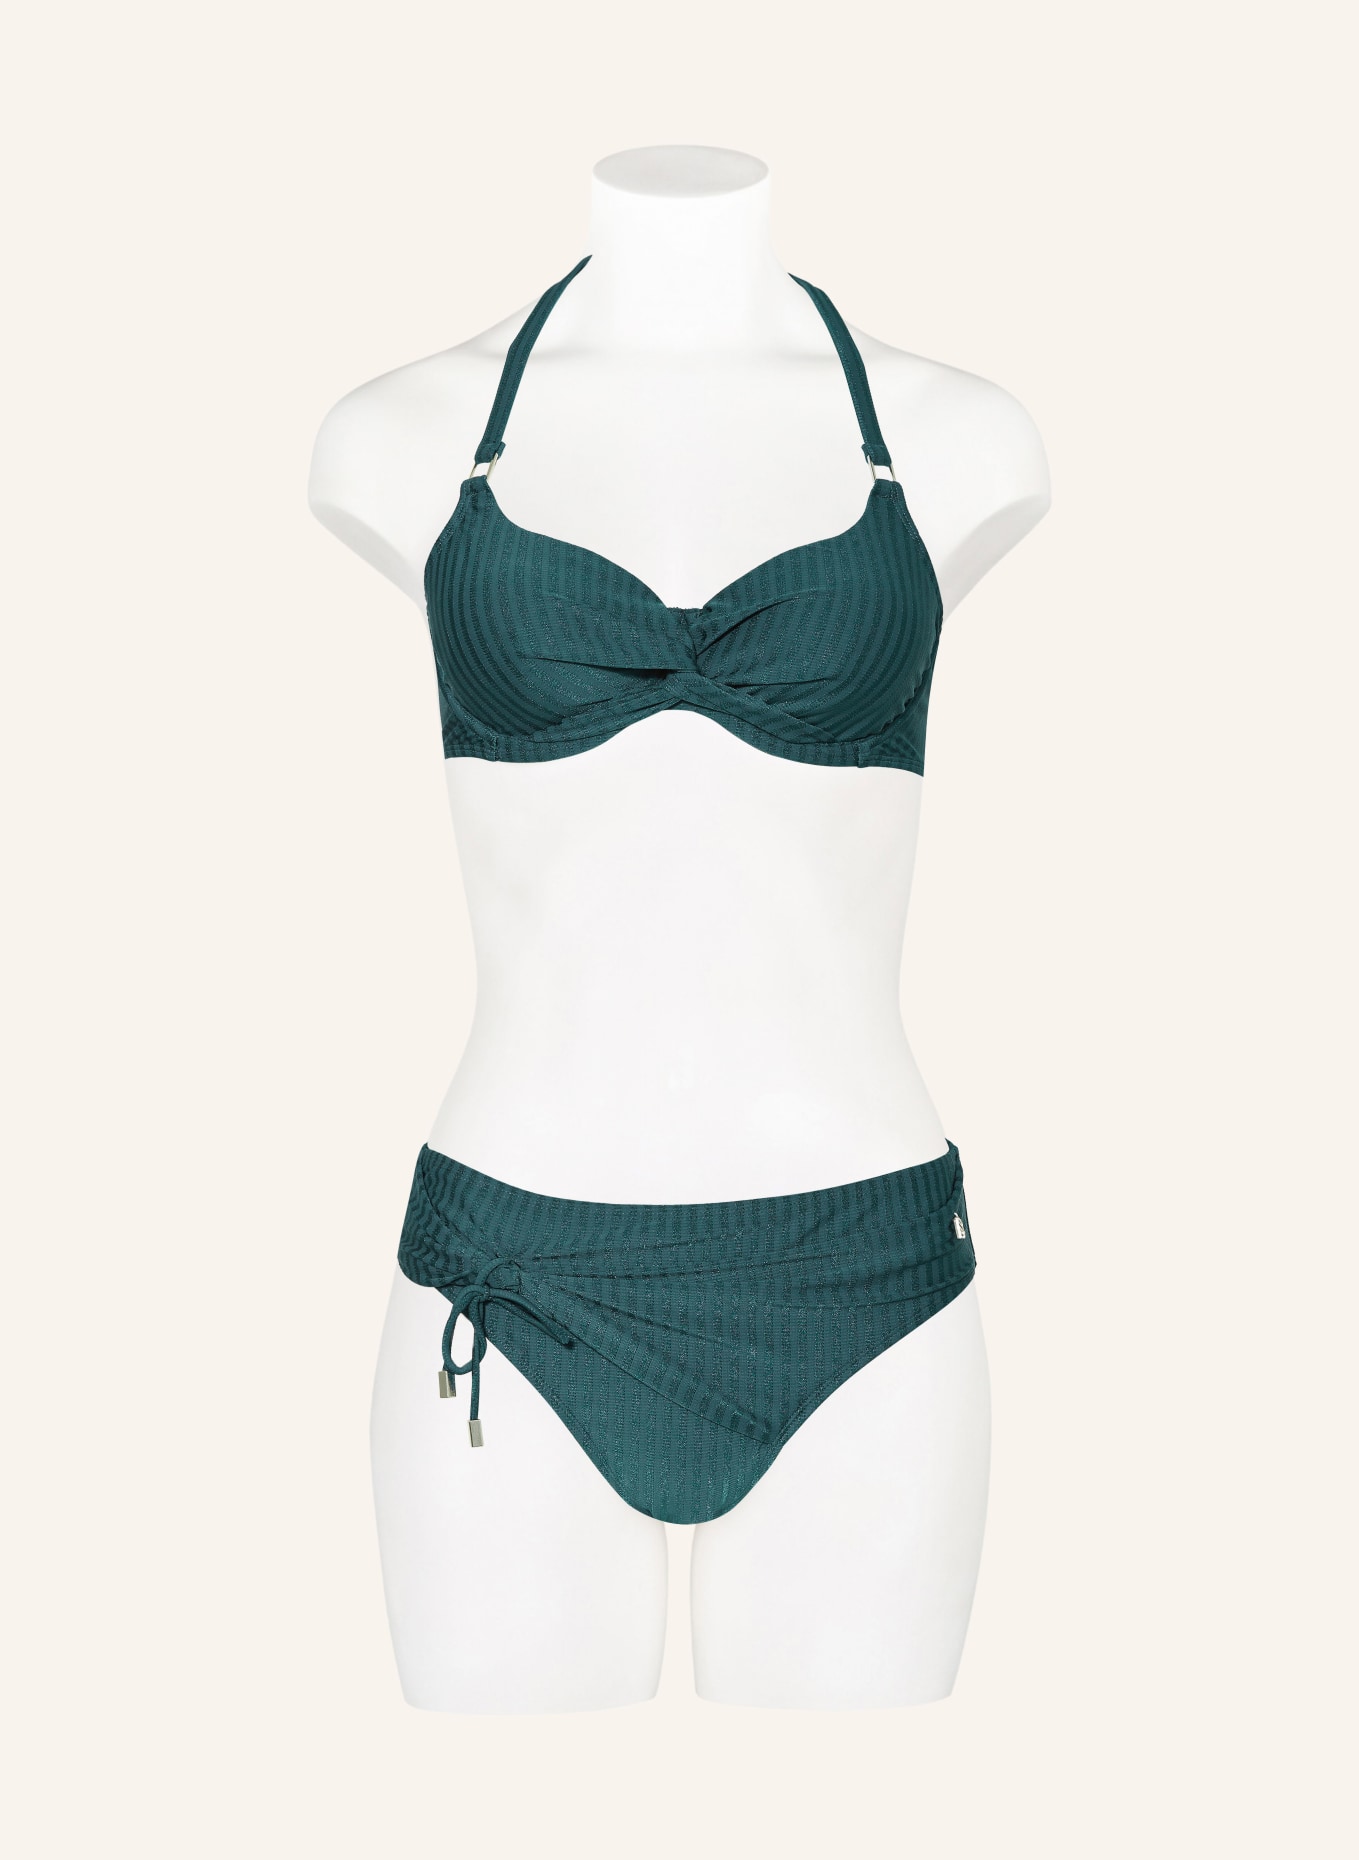 BEACHLIFE Underwired bikini top REFLECTING POND, Color: TEAL (Image 4)